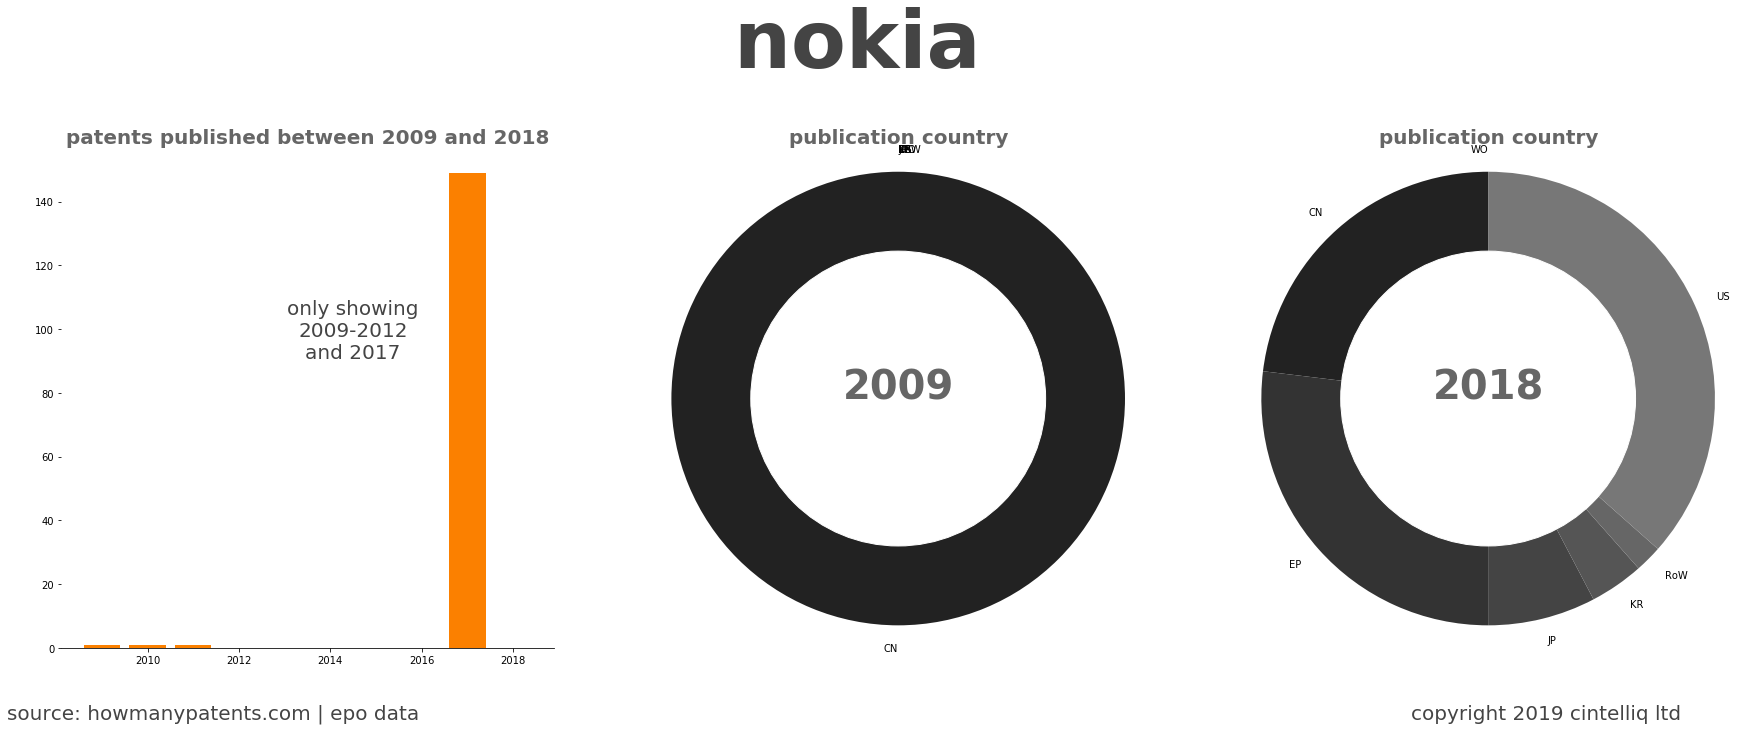 summary of patents for Nokia 